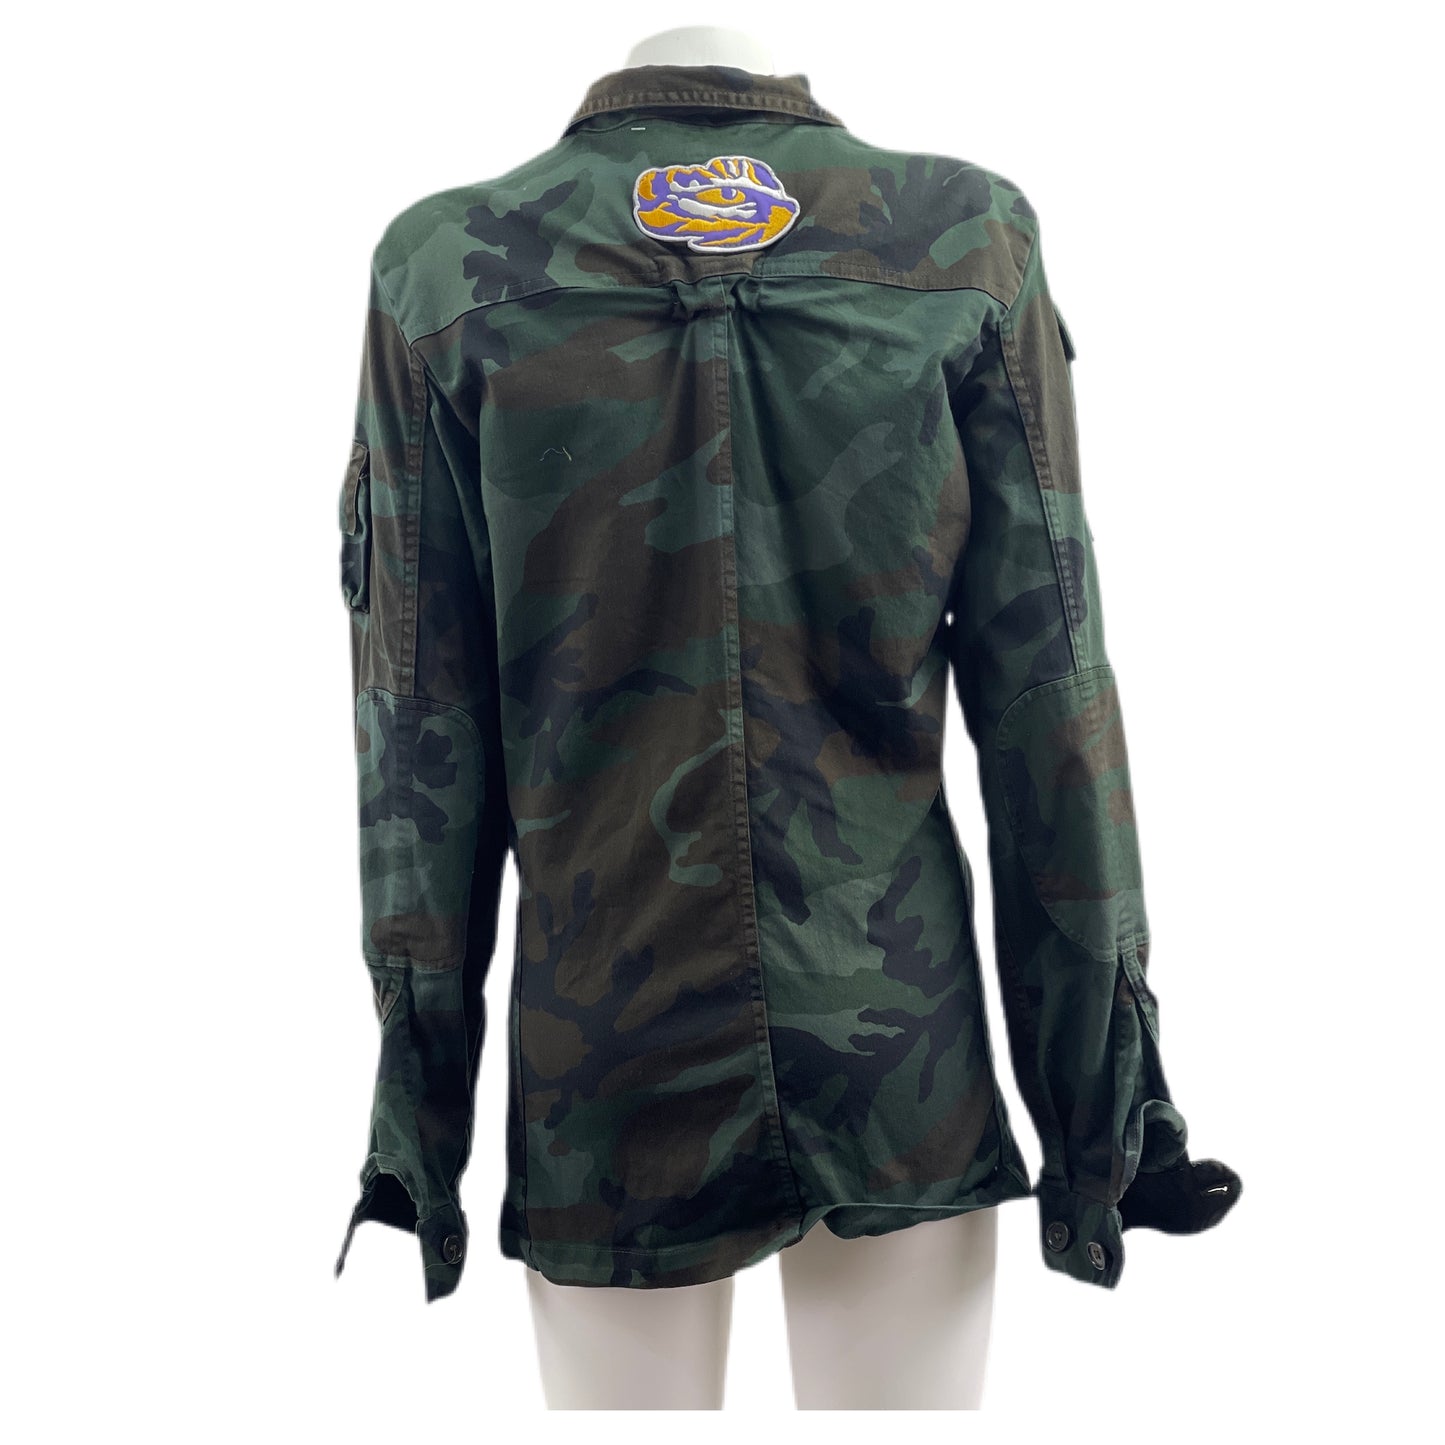 Camicia camouflage con patch cartoon TG. S